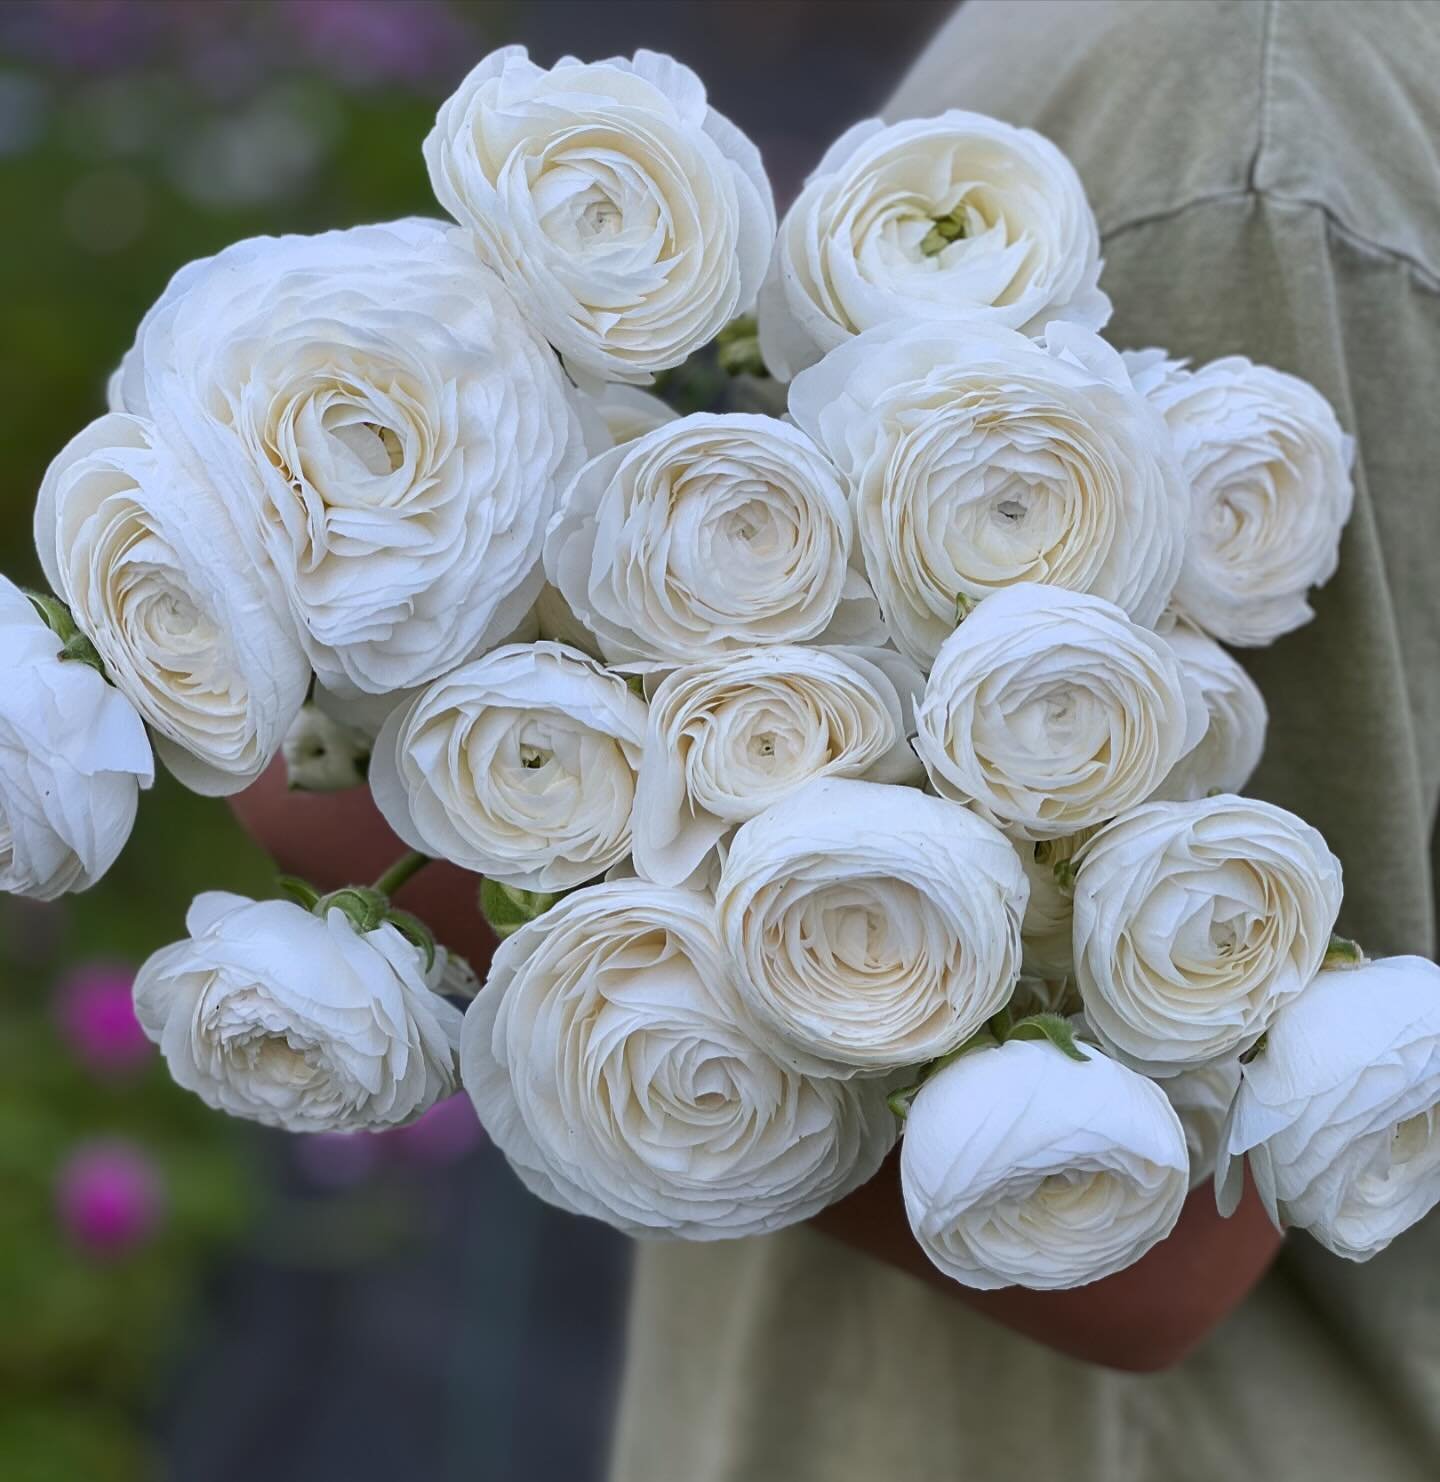 Happy Monday! I have to say, our white ranunculus are so pretty this season! So many delicate ruffles! Love them! 

#whiteranunculus 
#salmonranunculus #picoteeranunculus #springbulbs #springflowers #mothersdayflowers #mothersdaygift #picoteepink #gr